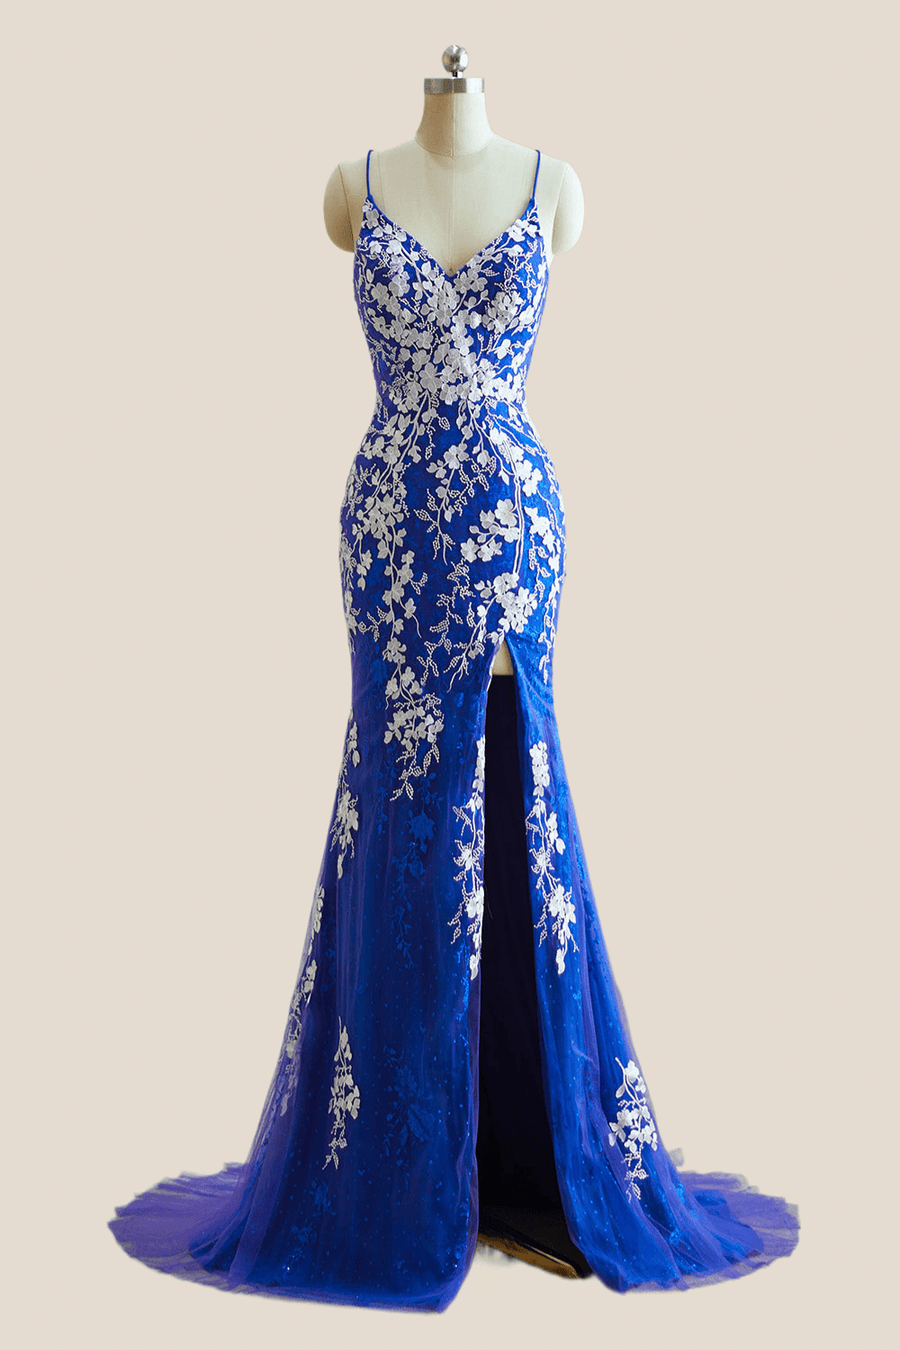 Straps Royal Blue and White Lace Mermaid Formal Dress